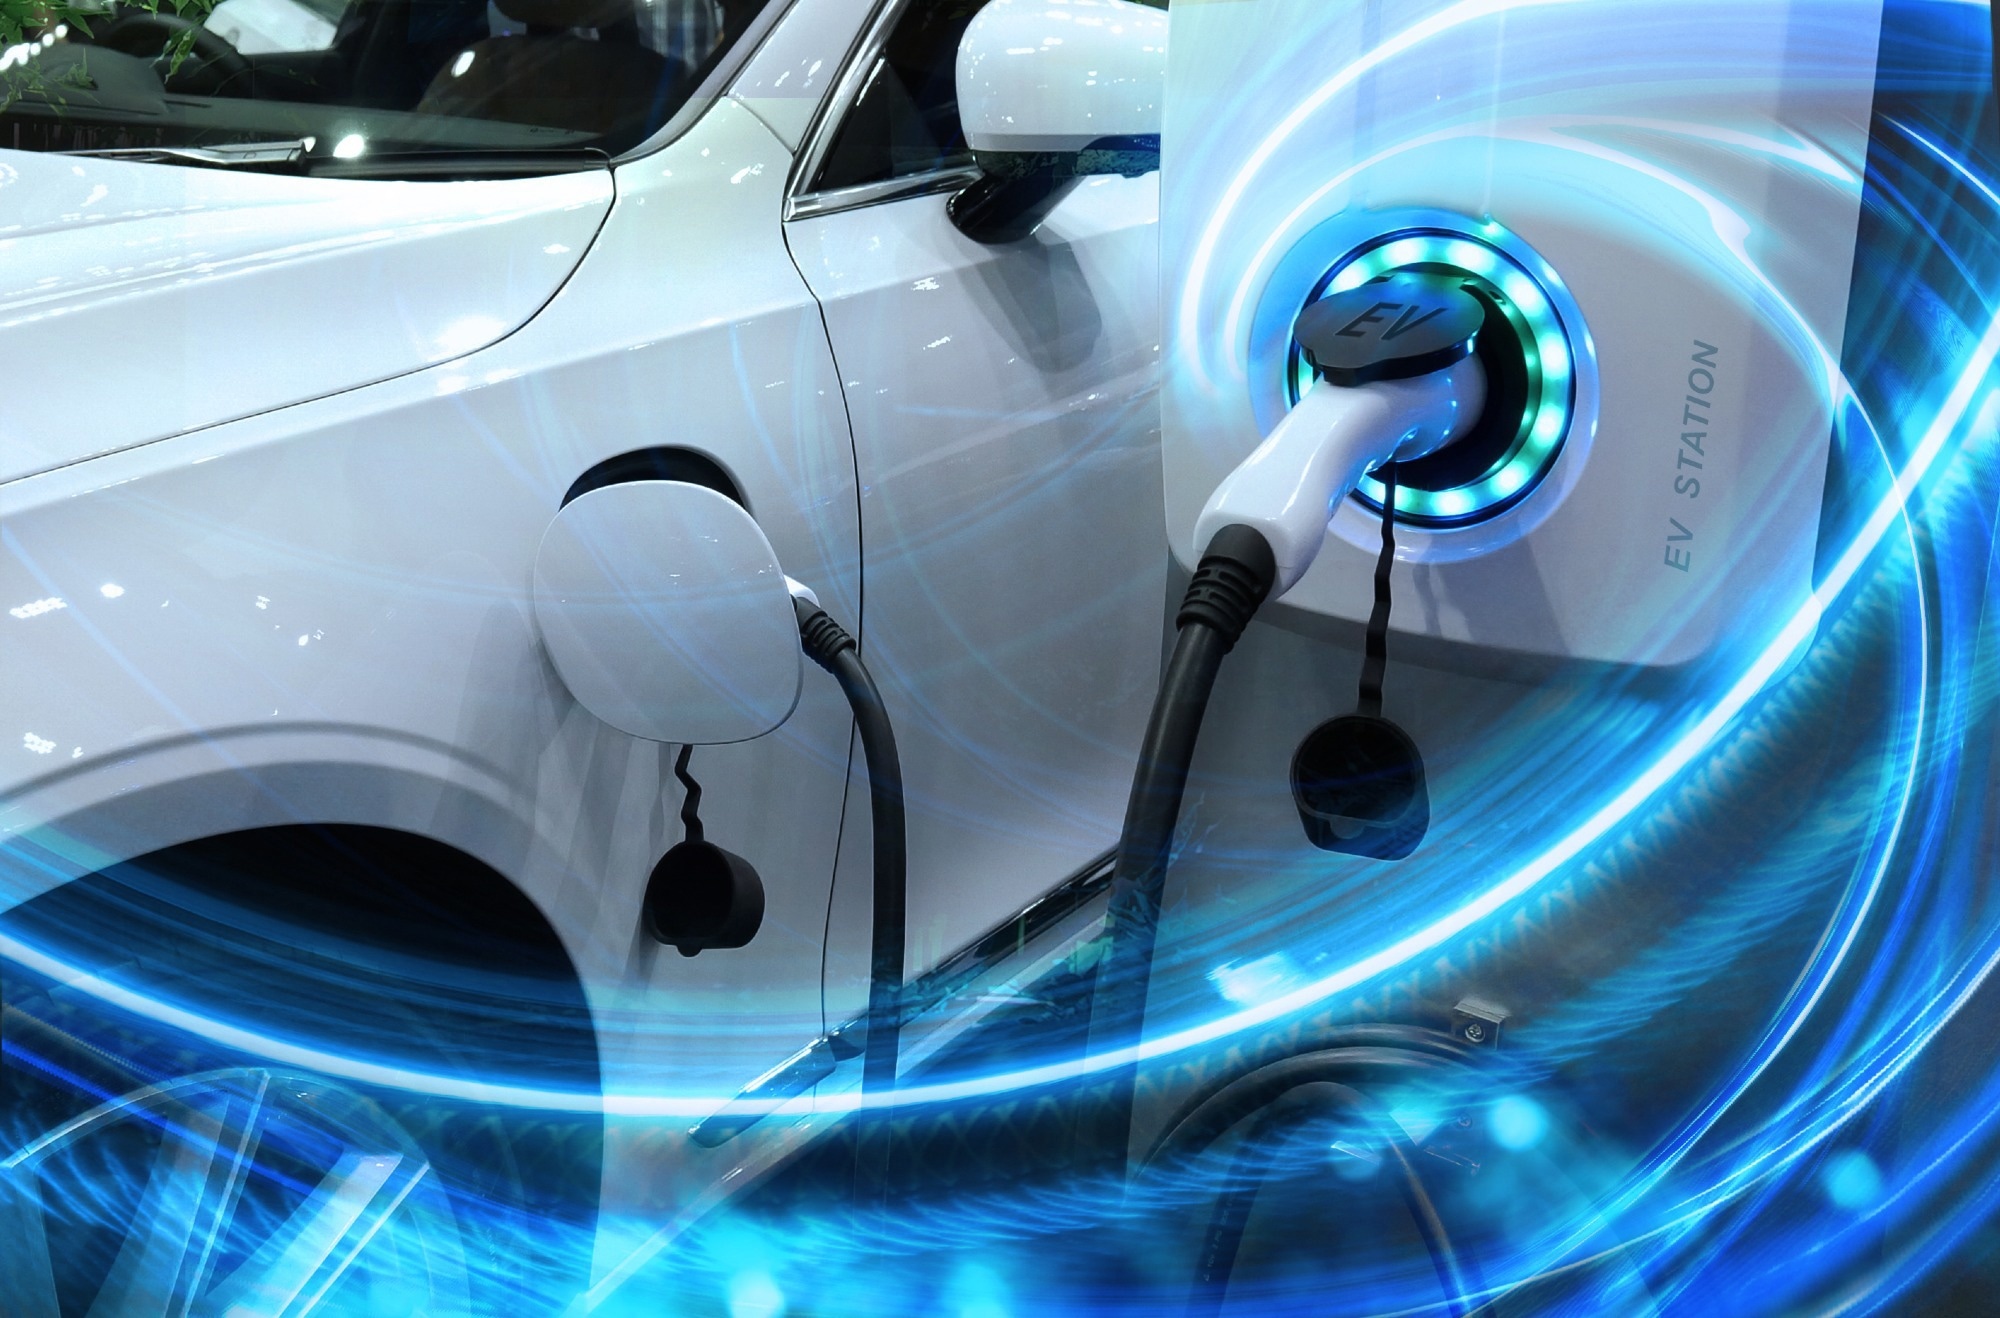 Speeding Up the Transition to Electric Vehicles